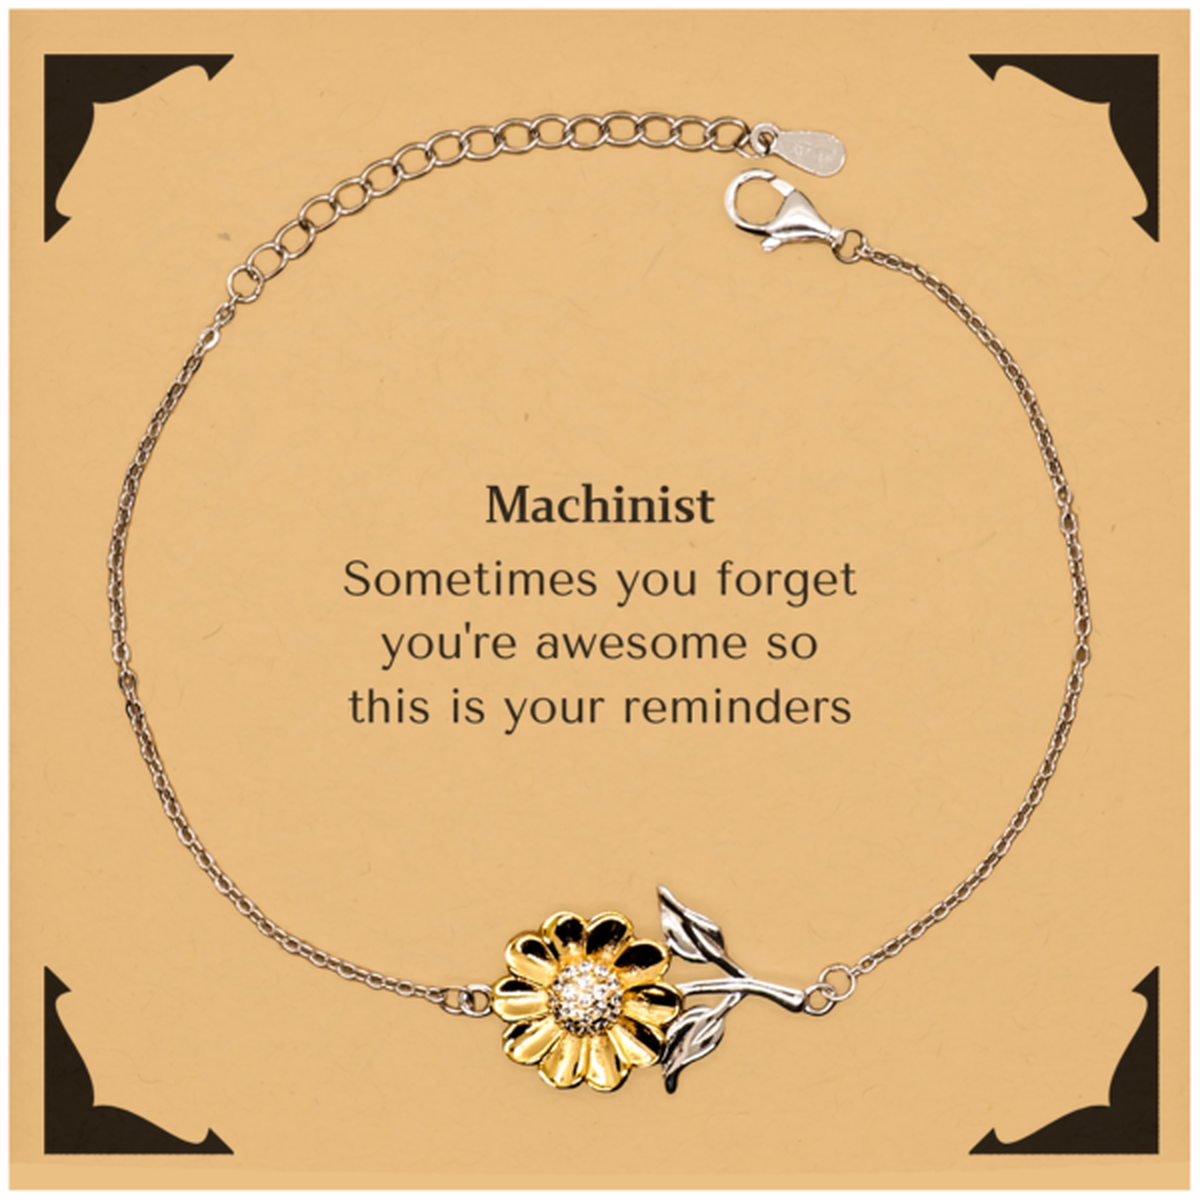 Sentimental Machinist Sunflower Bracelet, Machinist Sometimes you forget you're awesome so this is your reminders, Graduation Christmas Birthday Gifts for Machinist, Men, Women, Coworkers